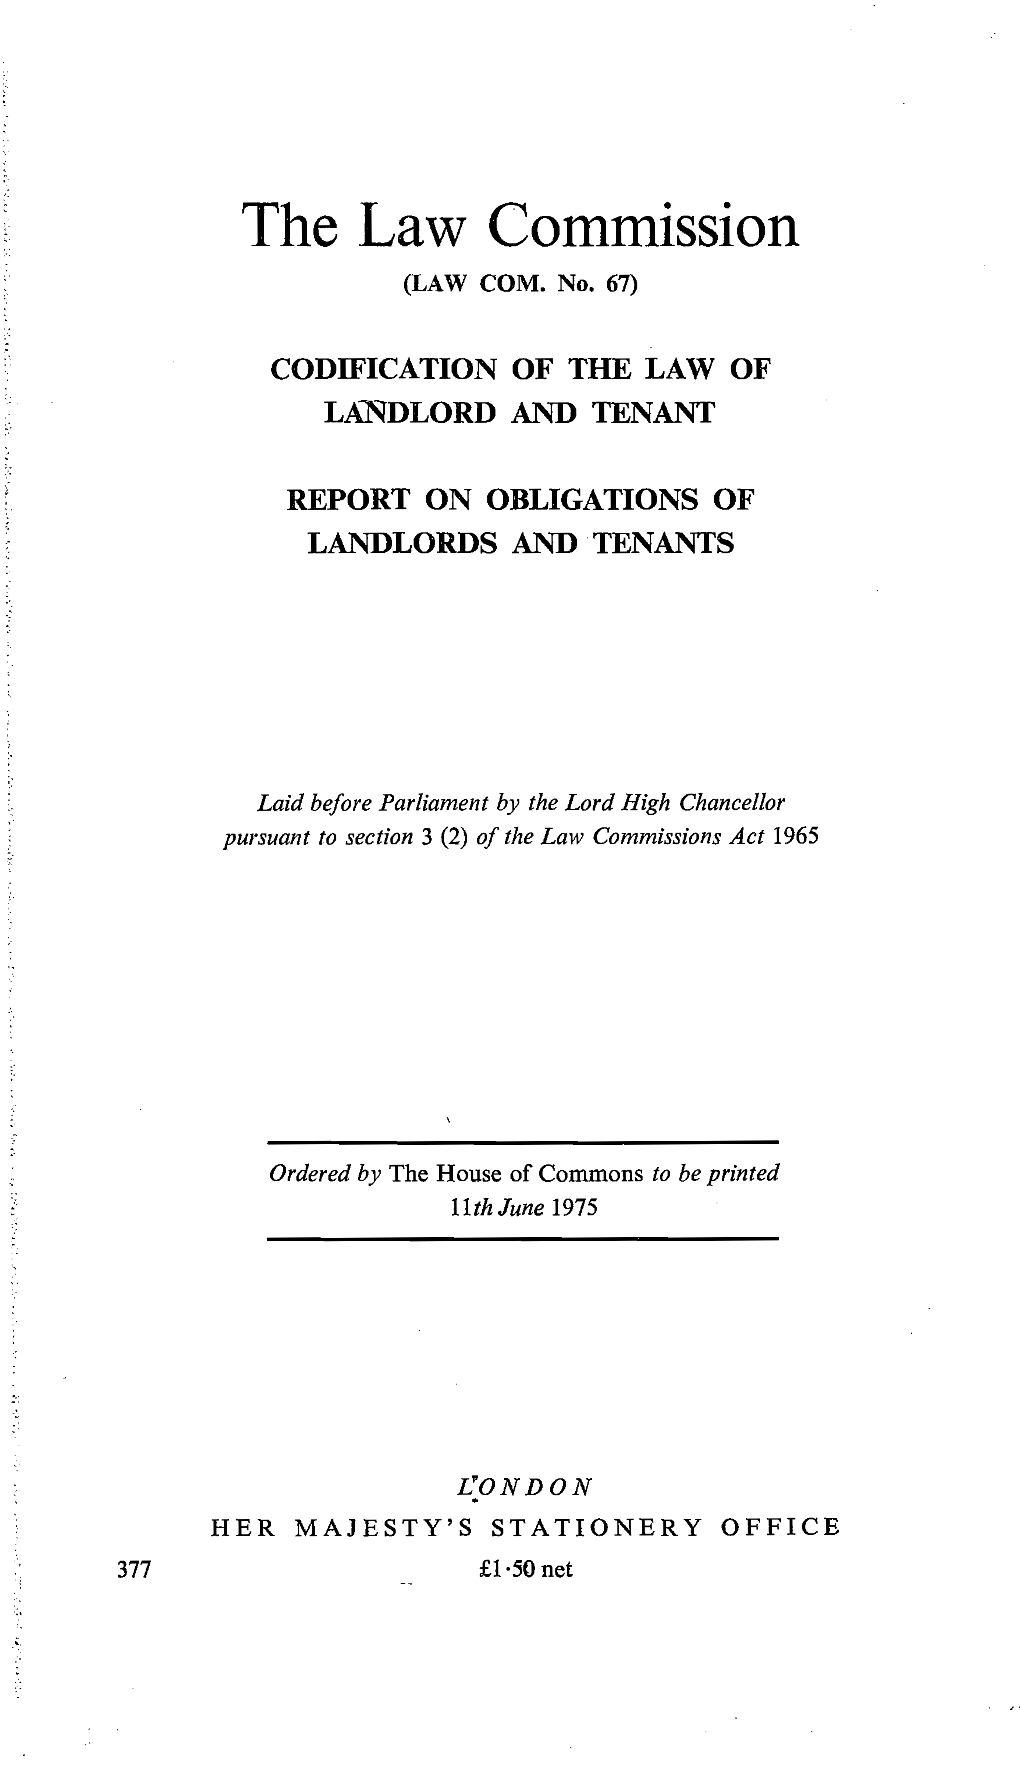 Report on the Obligations of Landlords